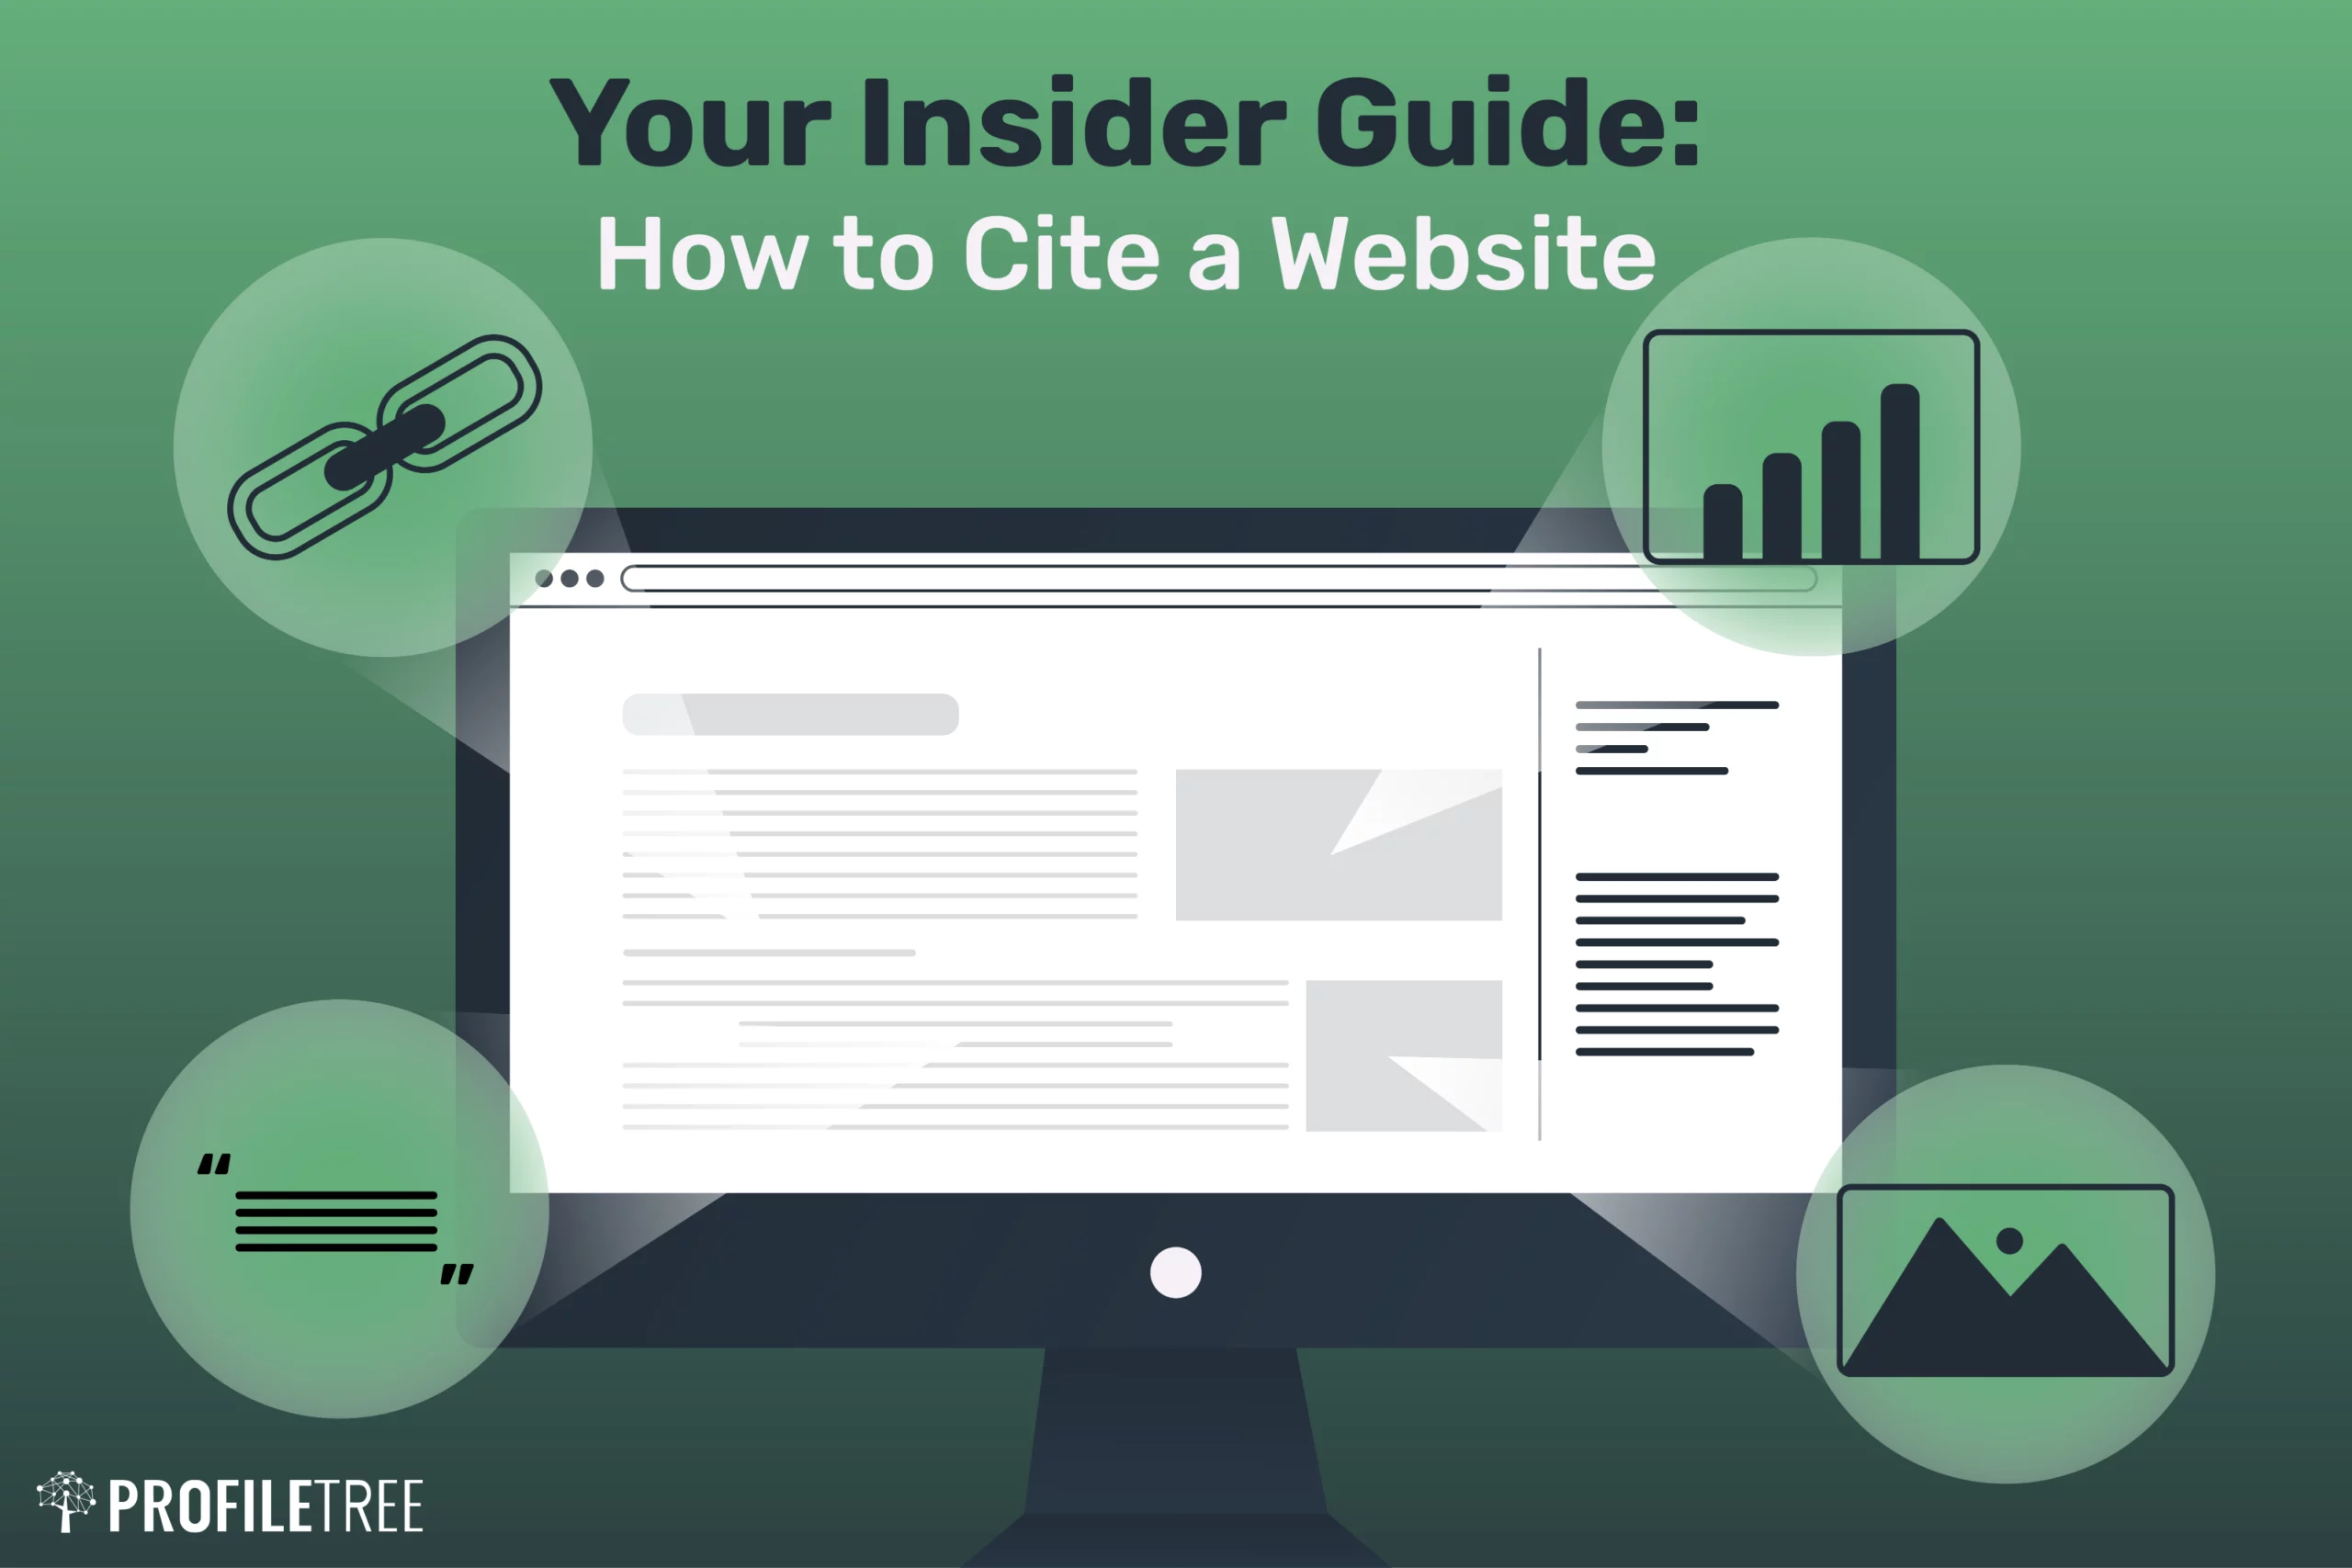 Your Insider Guide How to Cite a Website